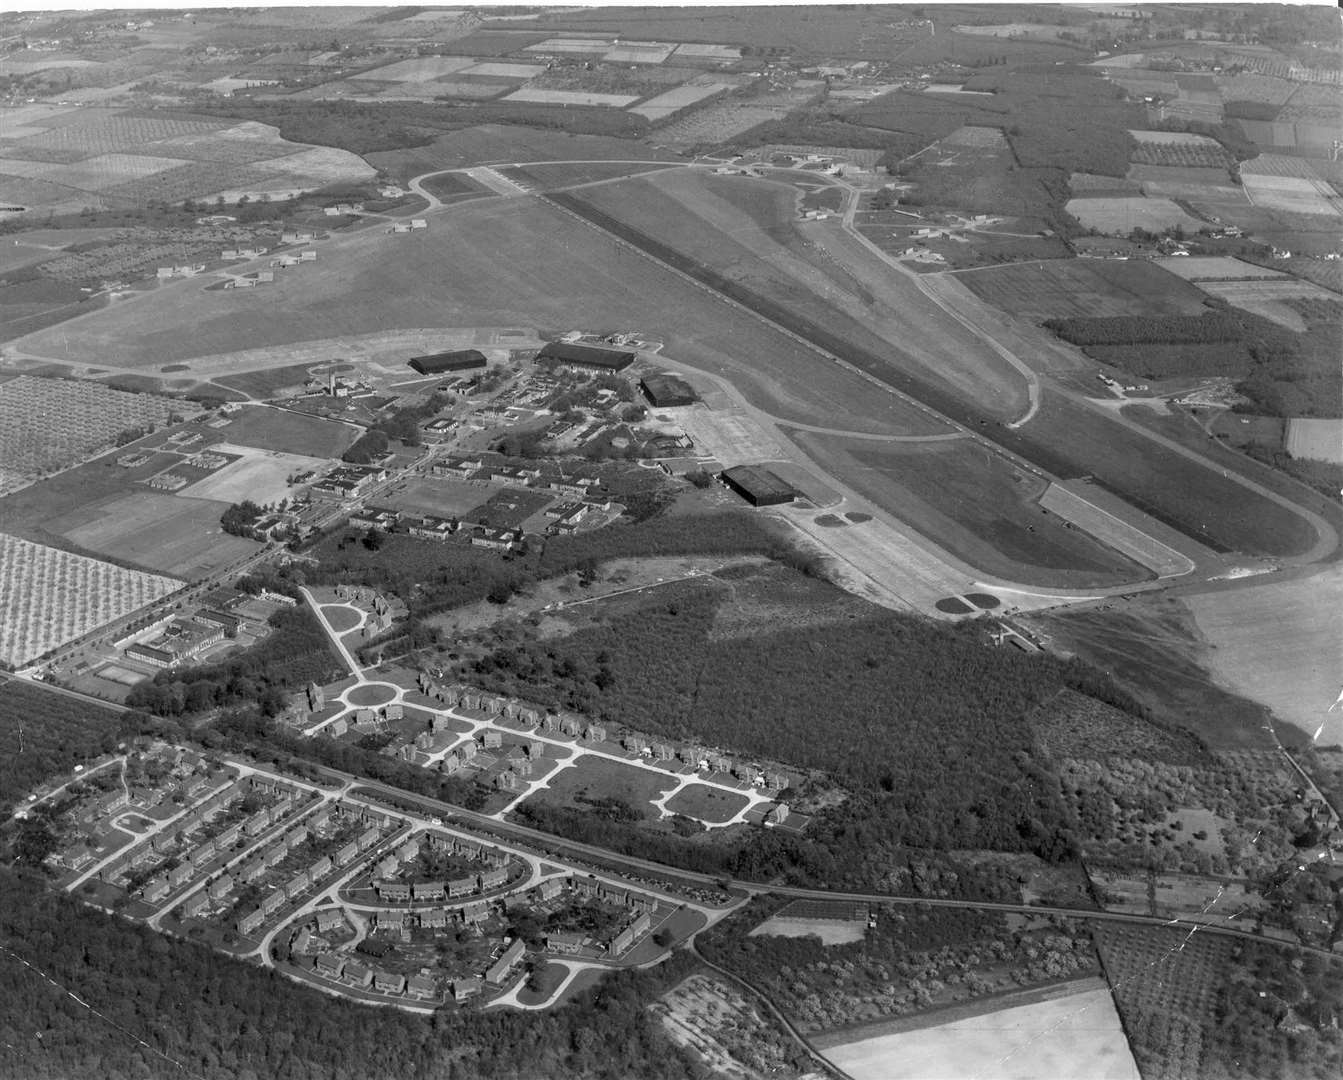 West Malling airfield in 1981. It played host to the Great Warbirds Air Displays, an annual spectacle of mammoth proportions which always drew in immense crowds. The Kings Hill development started to take shape in 1989. Picture: Skyfotos